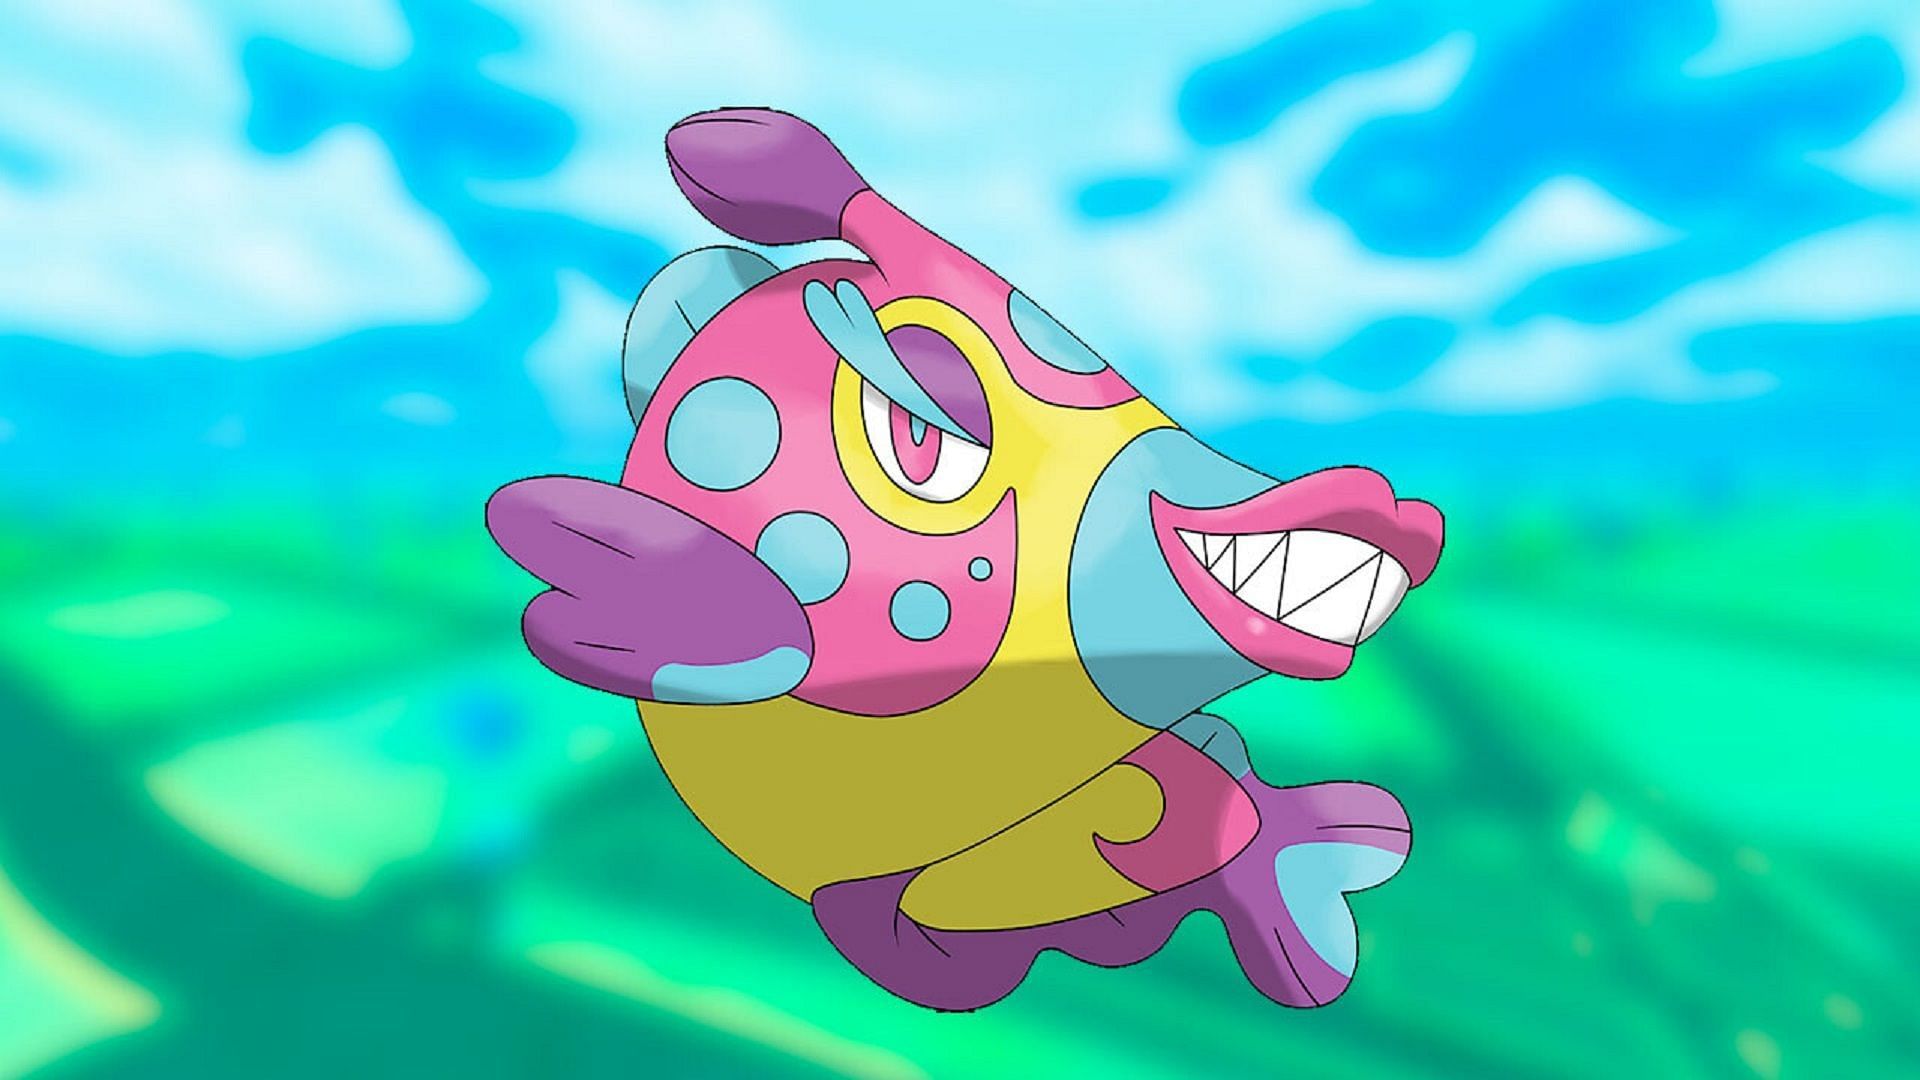 Bruxish is one of the latest additions to Pokemon GO